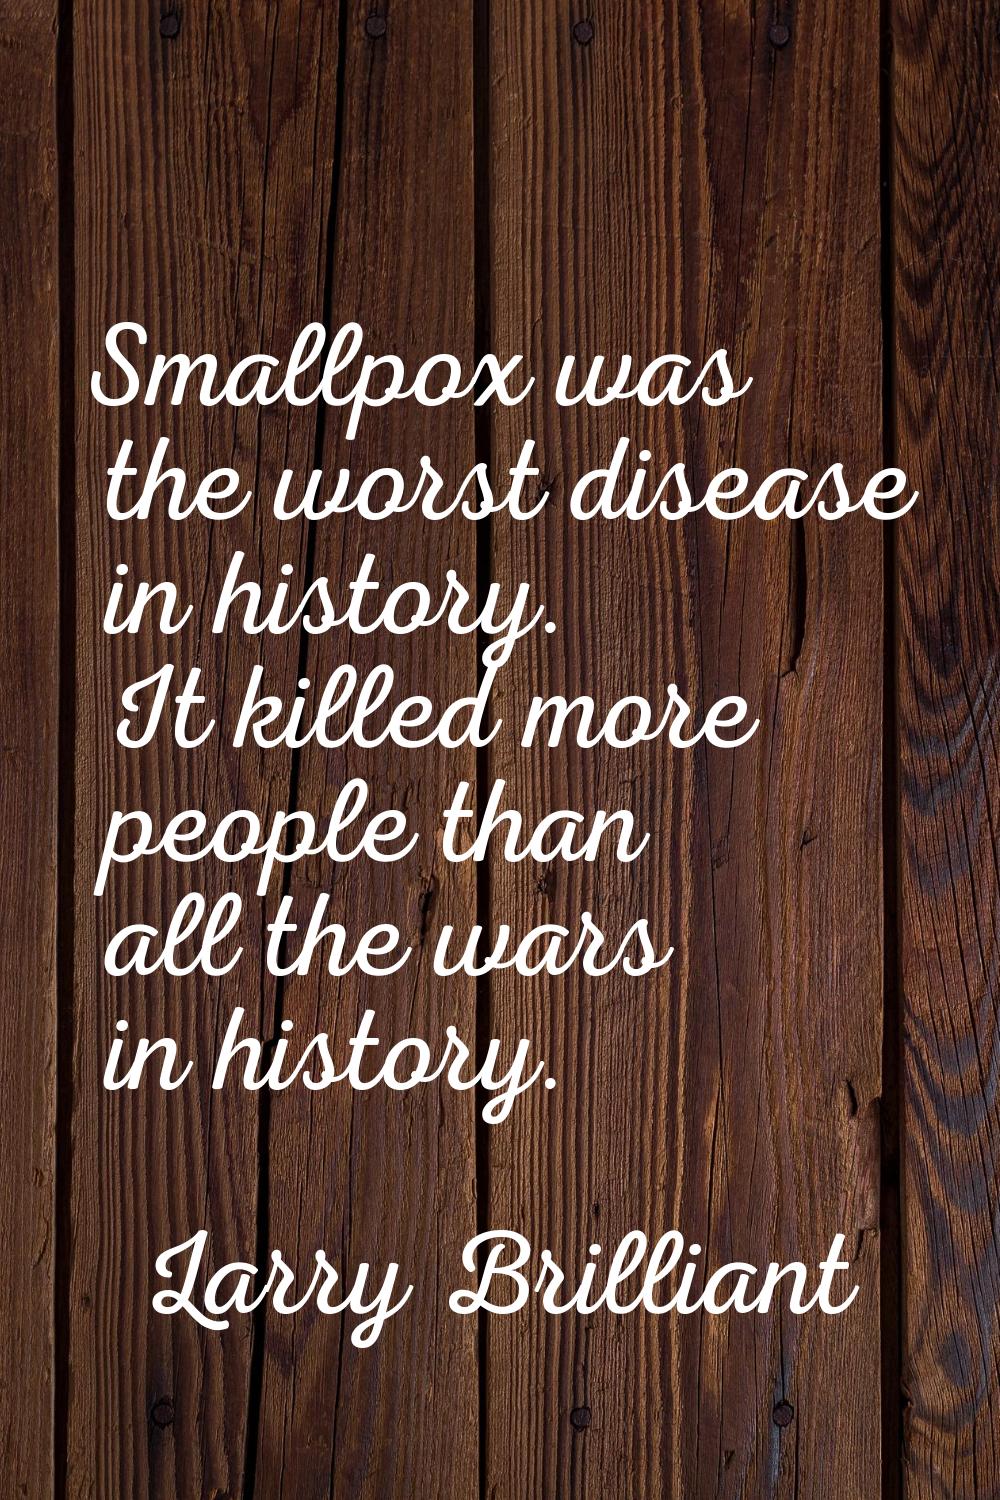 Smallpox was the worst disease in history. It killed more people than all the wars in history.